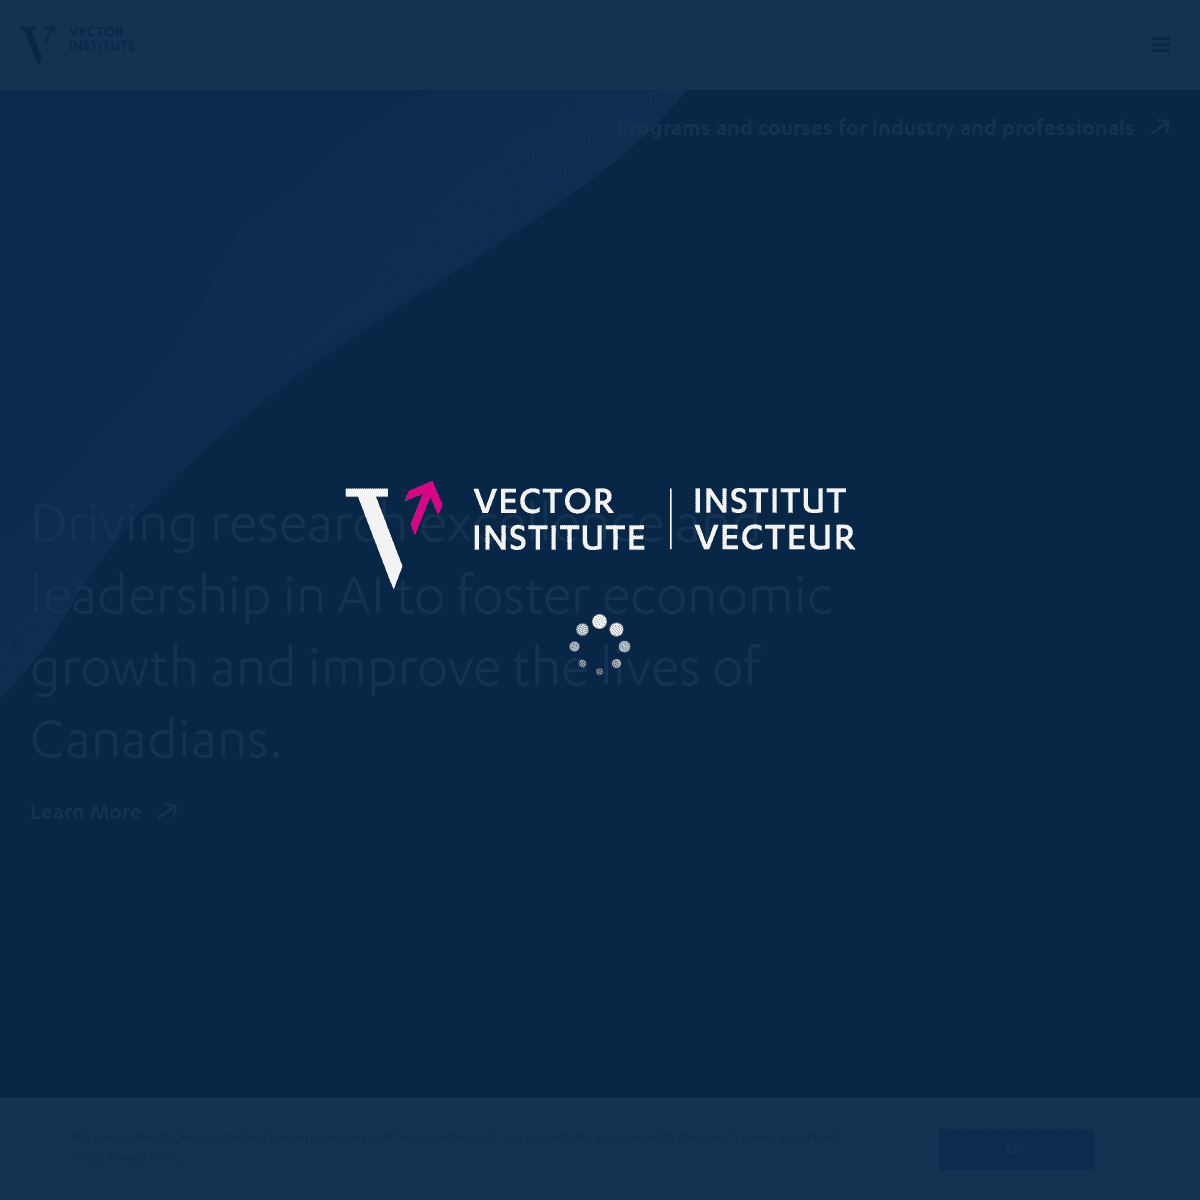 A complete backup of https://vectorinstitute.ai